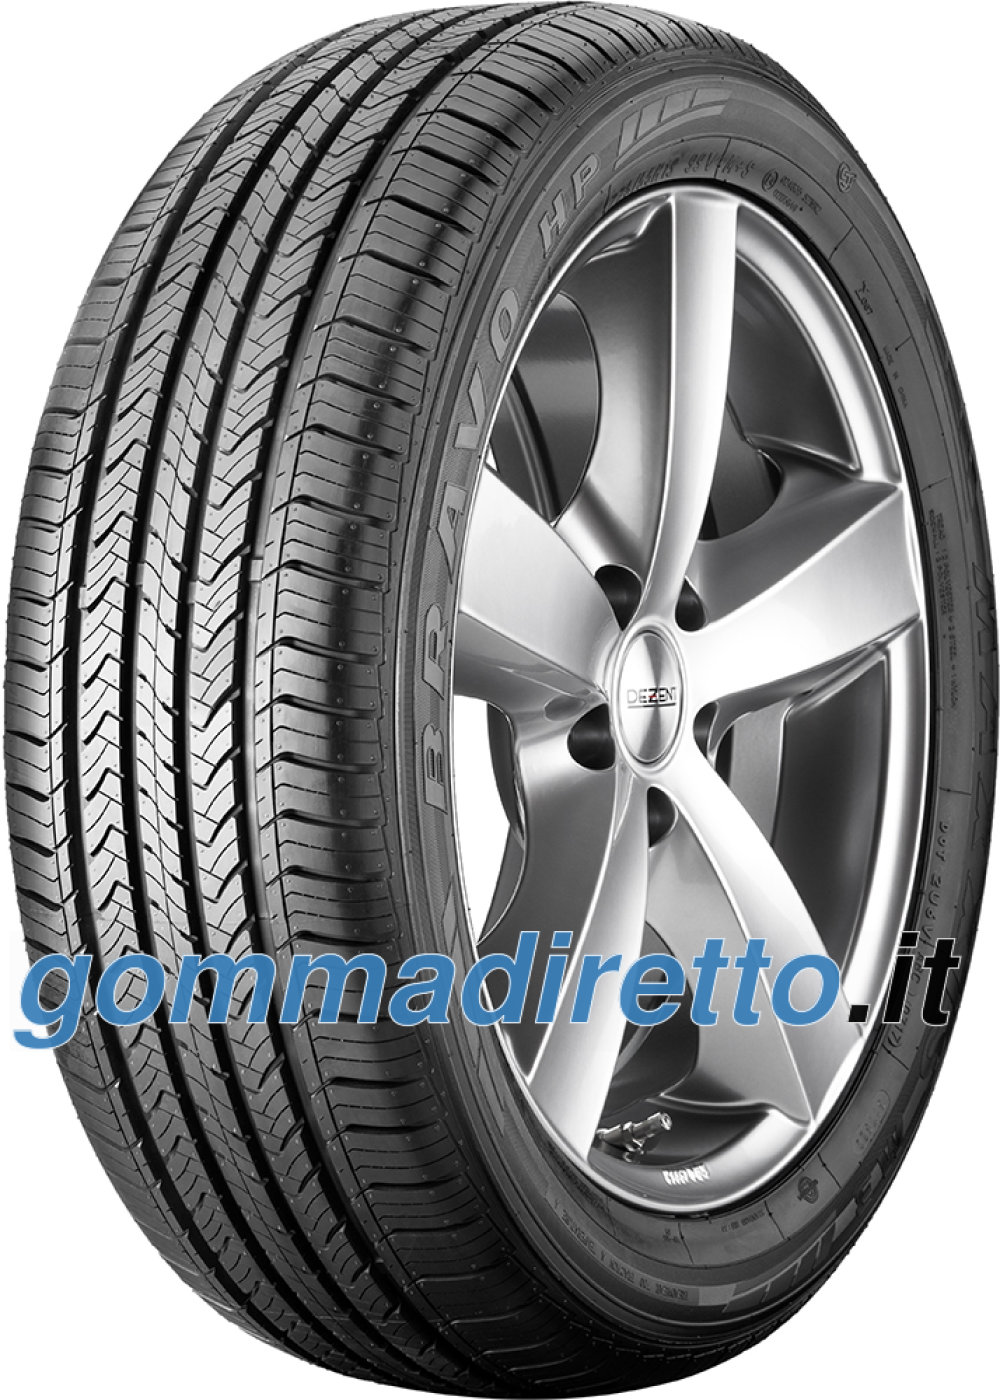 Image of Maxxis HP-M3 ( 215/55 R17 98V XL )